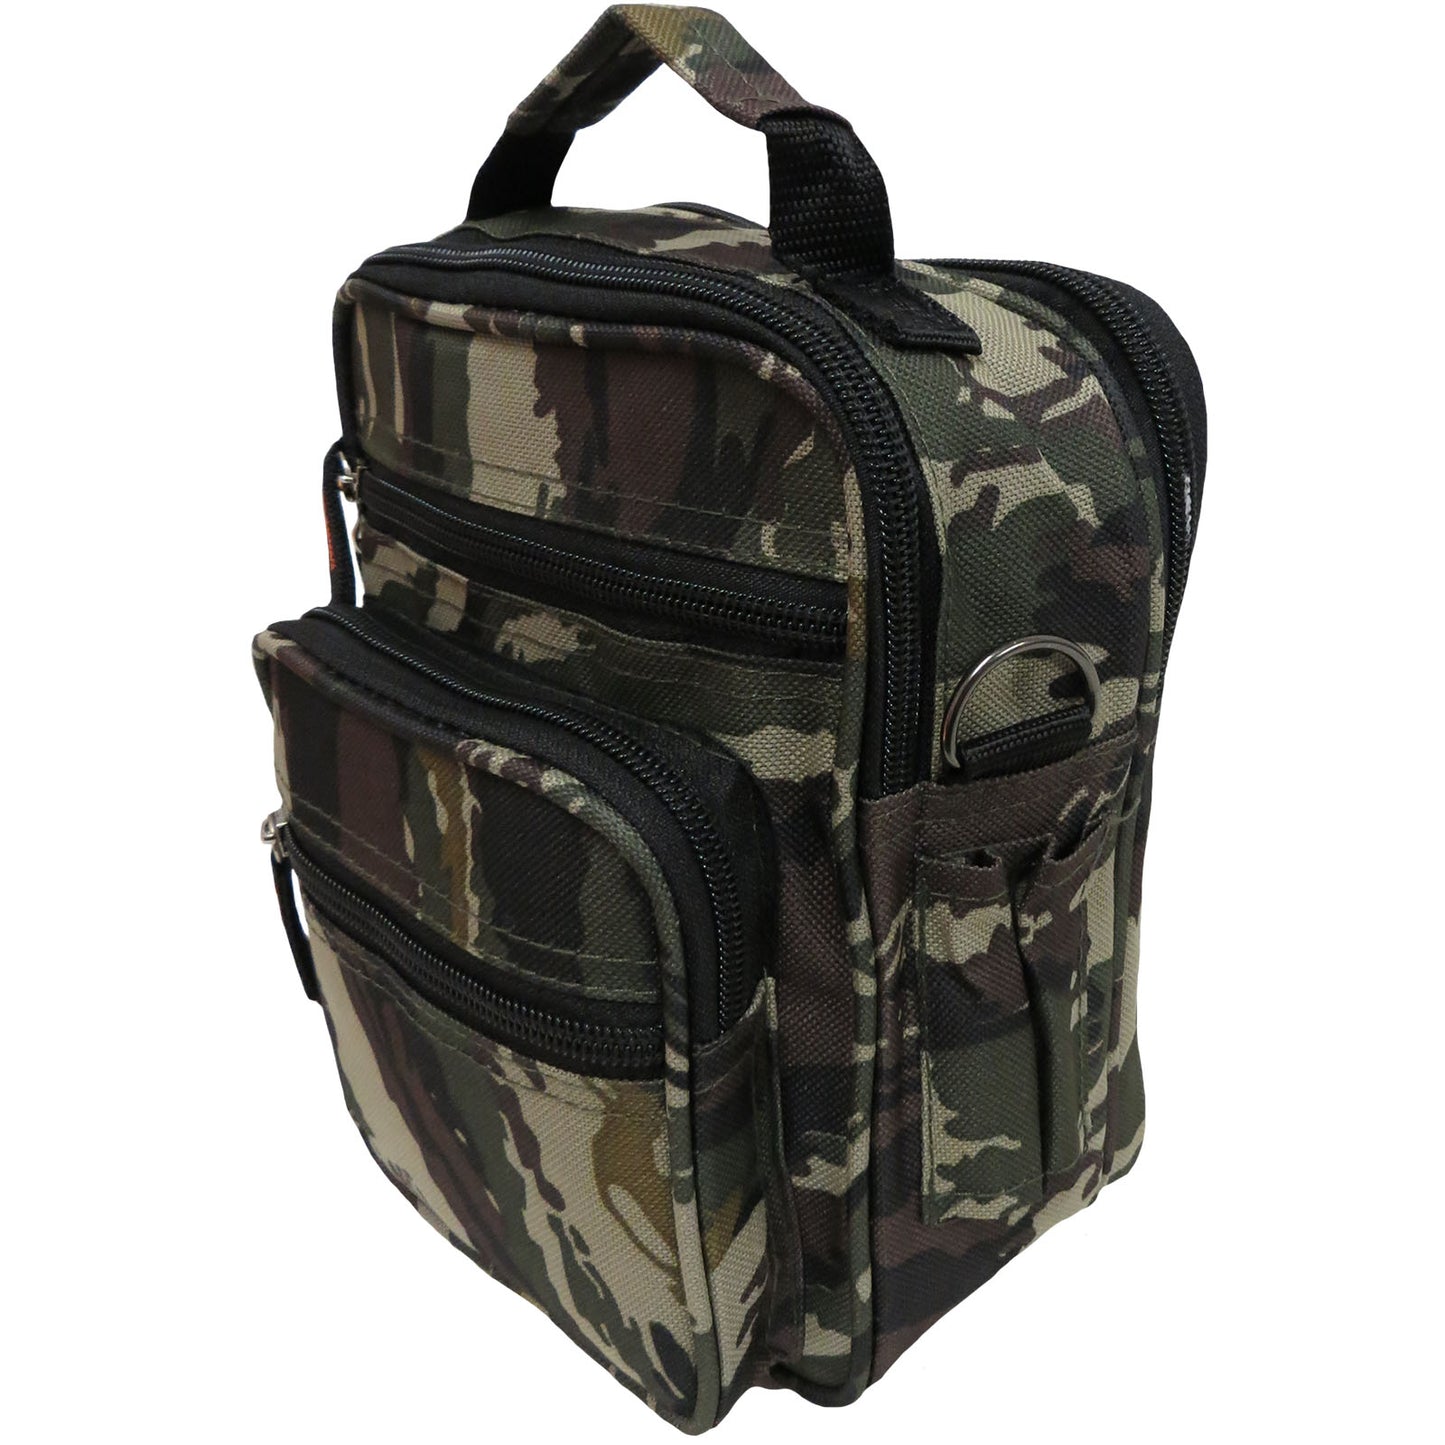 Camouflage Messenger Bag Convertible Fanny Pack Wholesale - Alessa Jamie